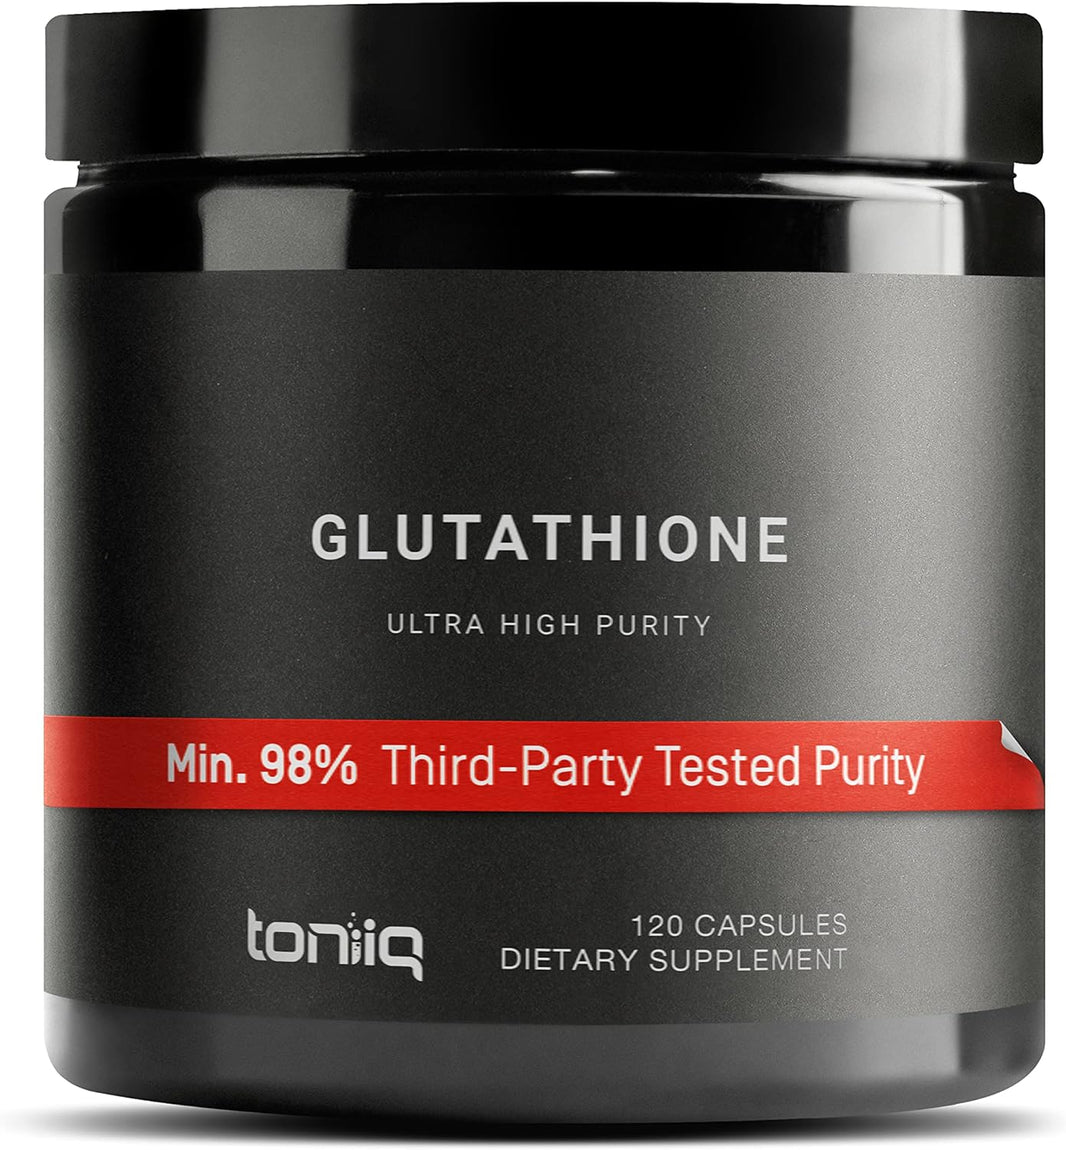 Toniiq Ultra High Strength Glutathione Capsules - 1000mg Concentrated Formula - 98%+ Highly Purified and Bioavailable - Non-GMO Fermentation - 120 Capsules Reduced Glutathione Supplement - Third Party Tested